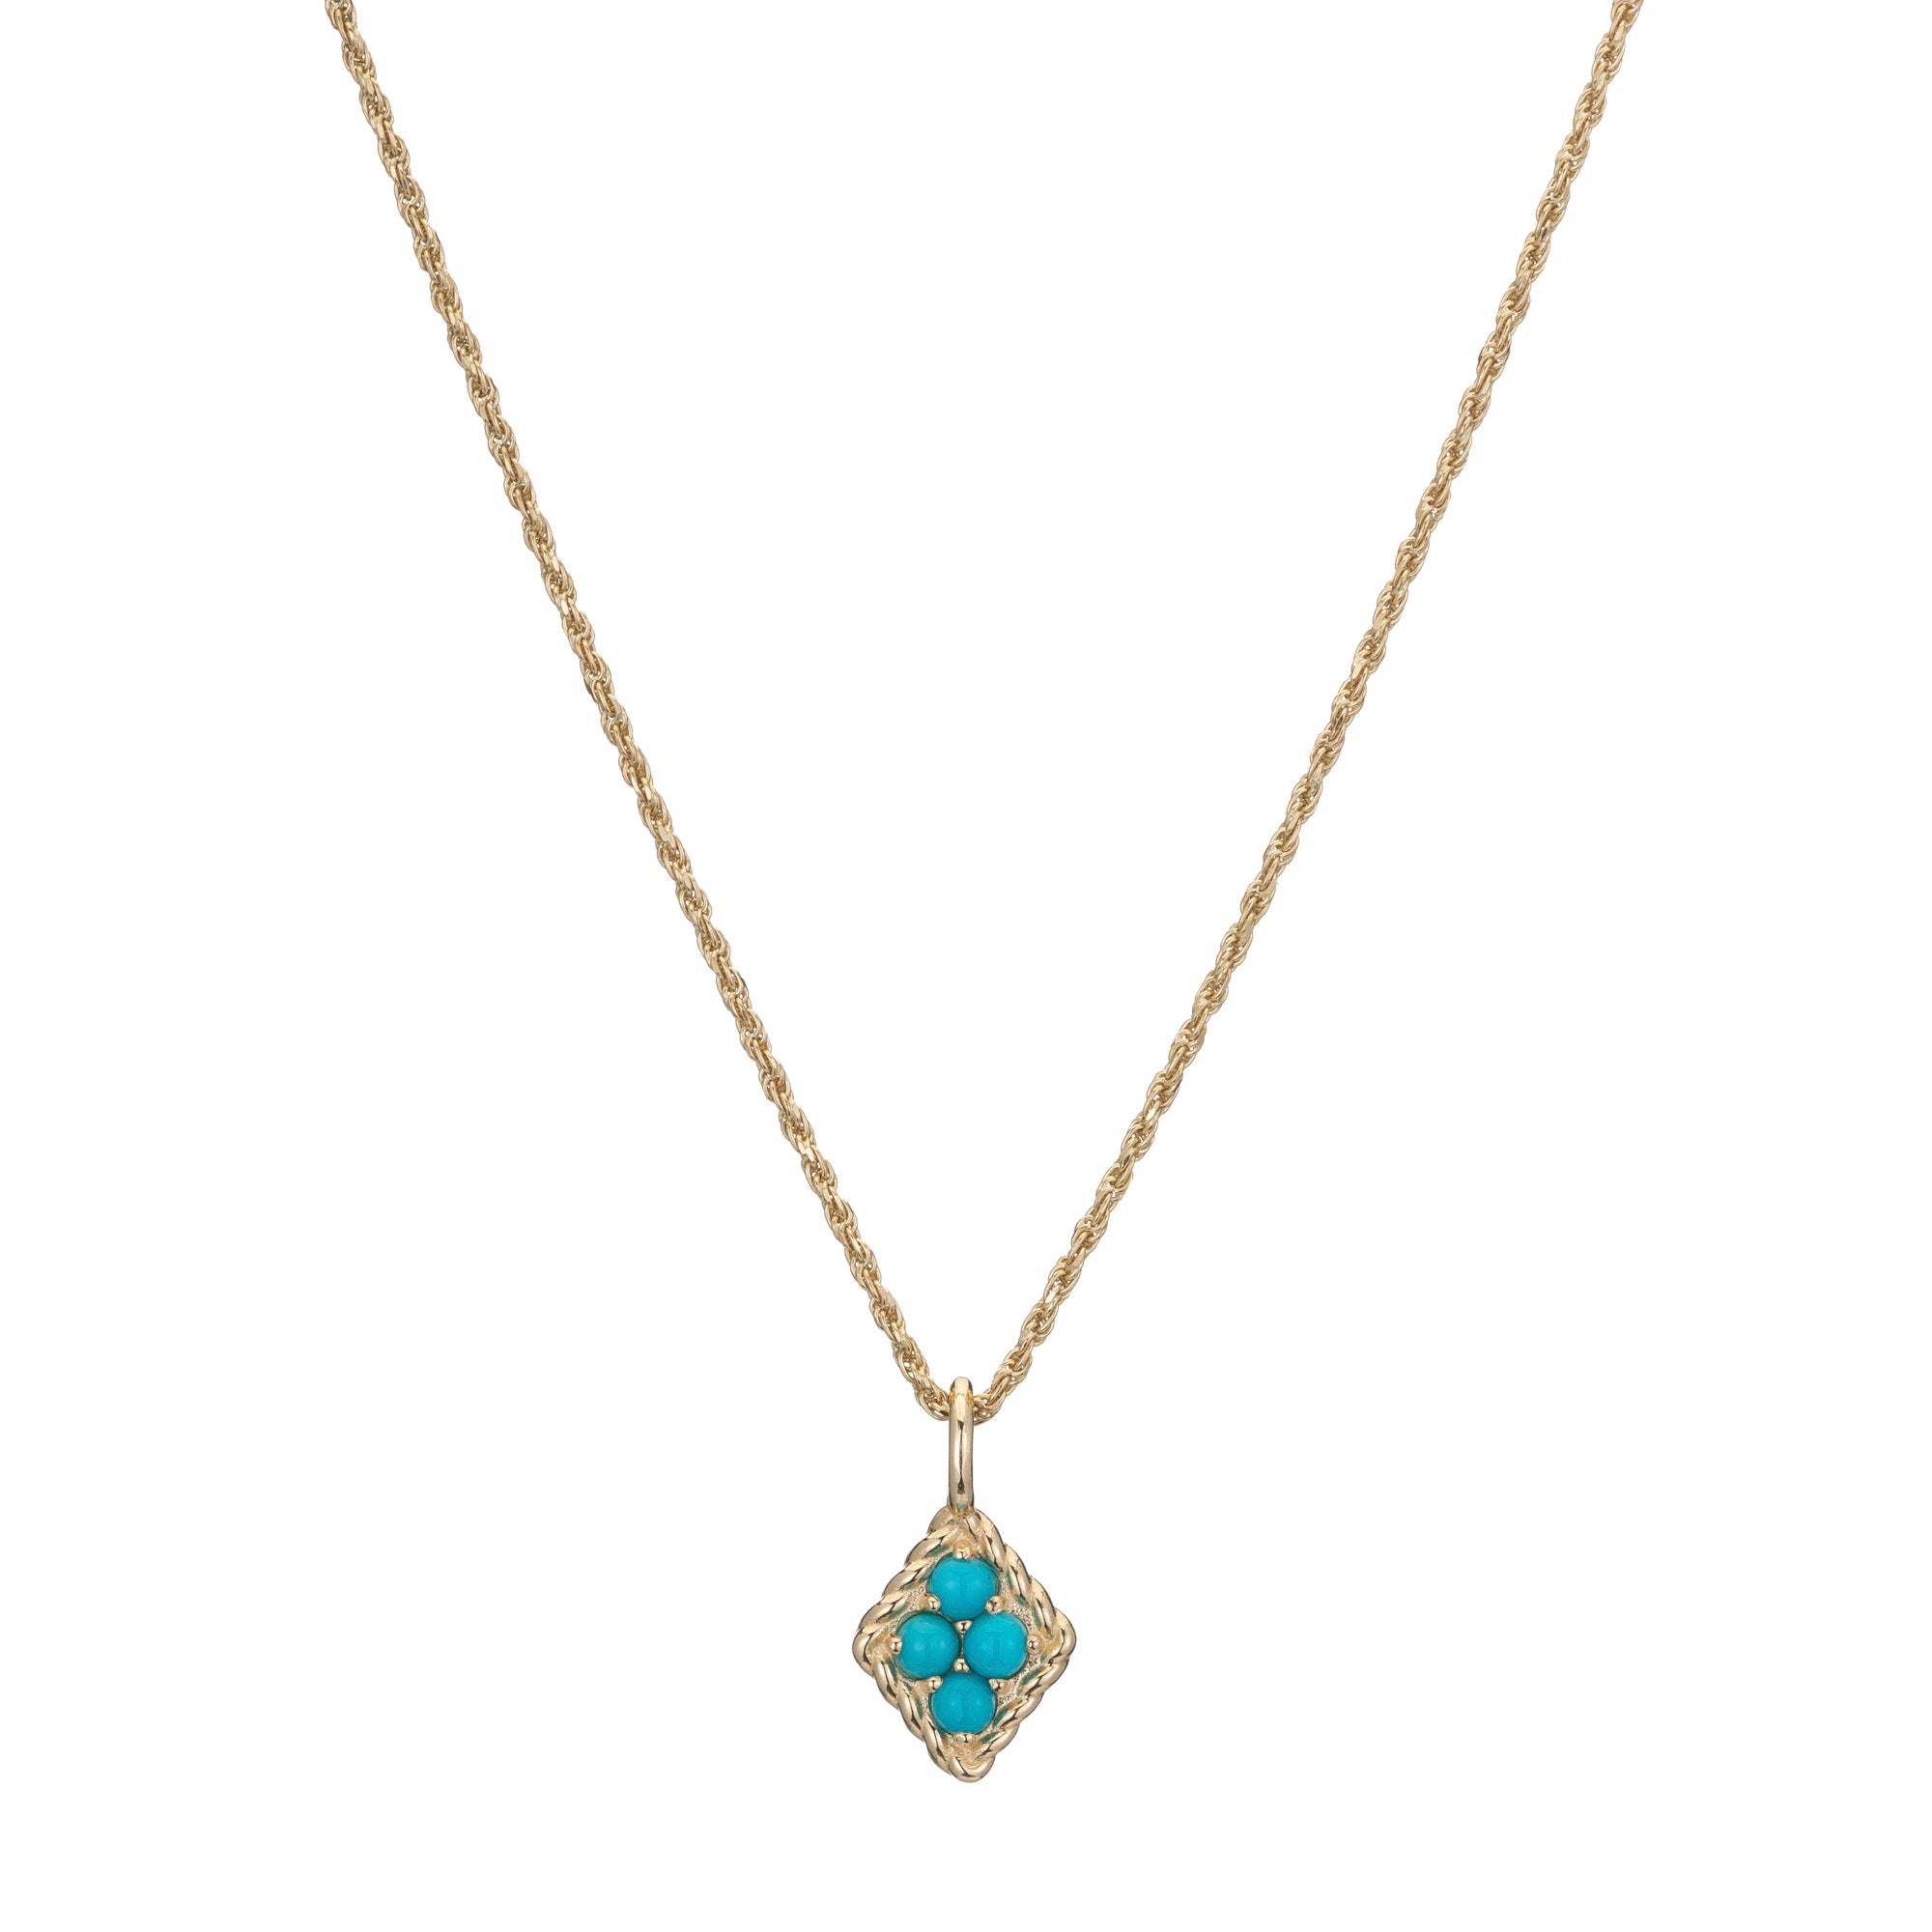 Imperial birthstone pendant with four turquoise colored stones 